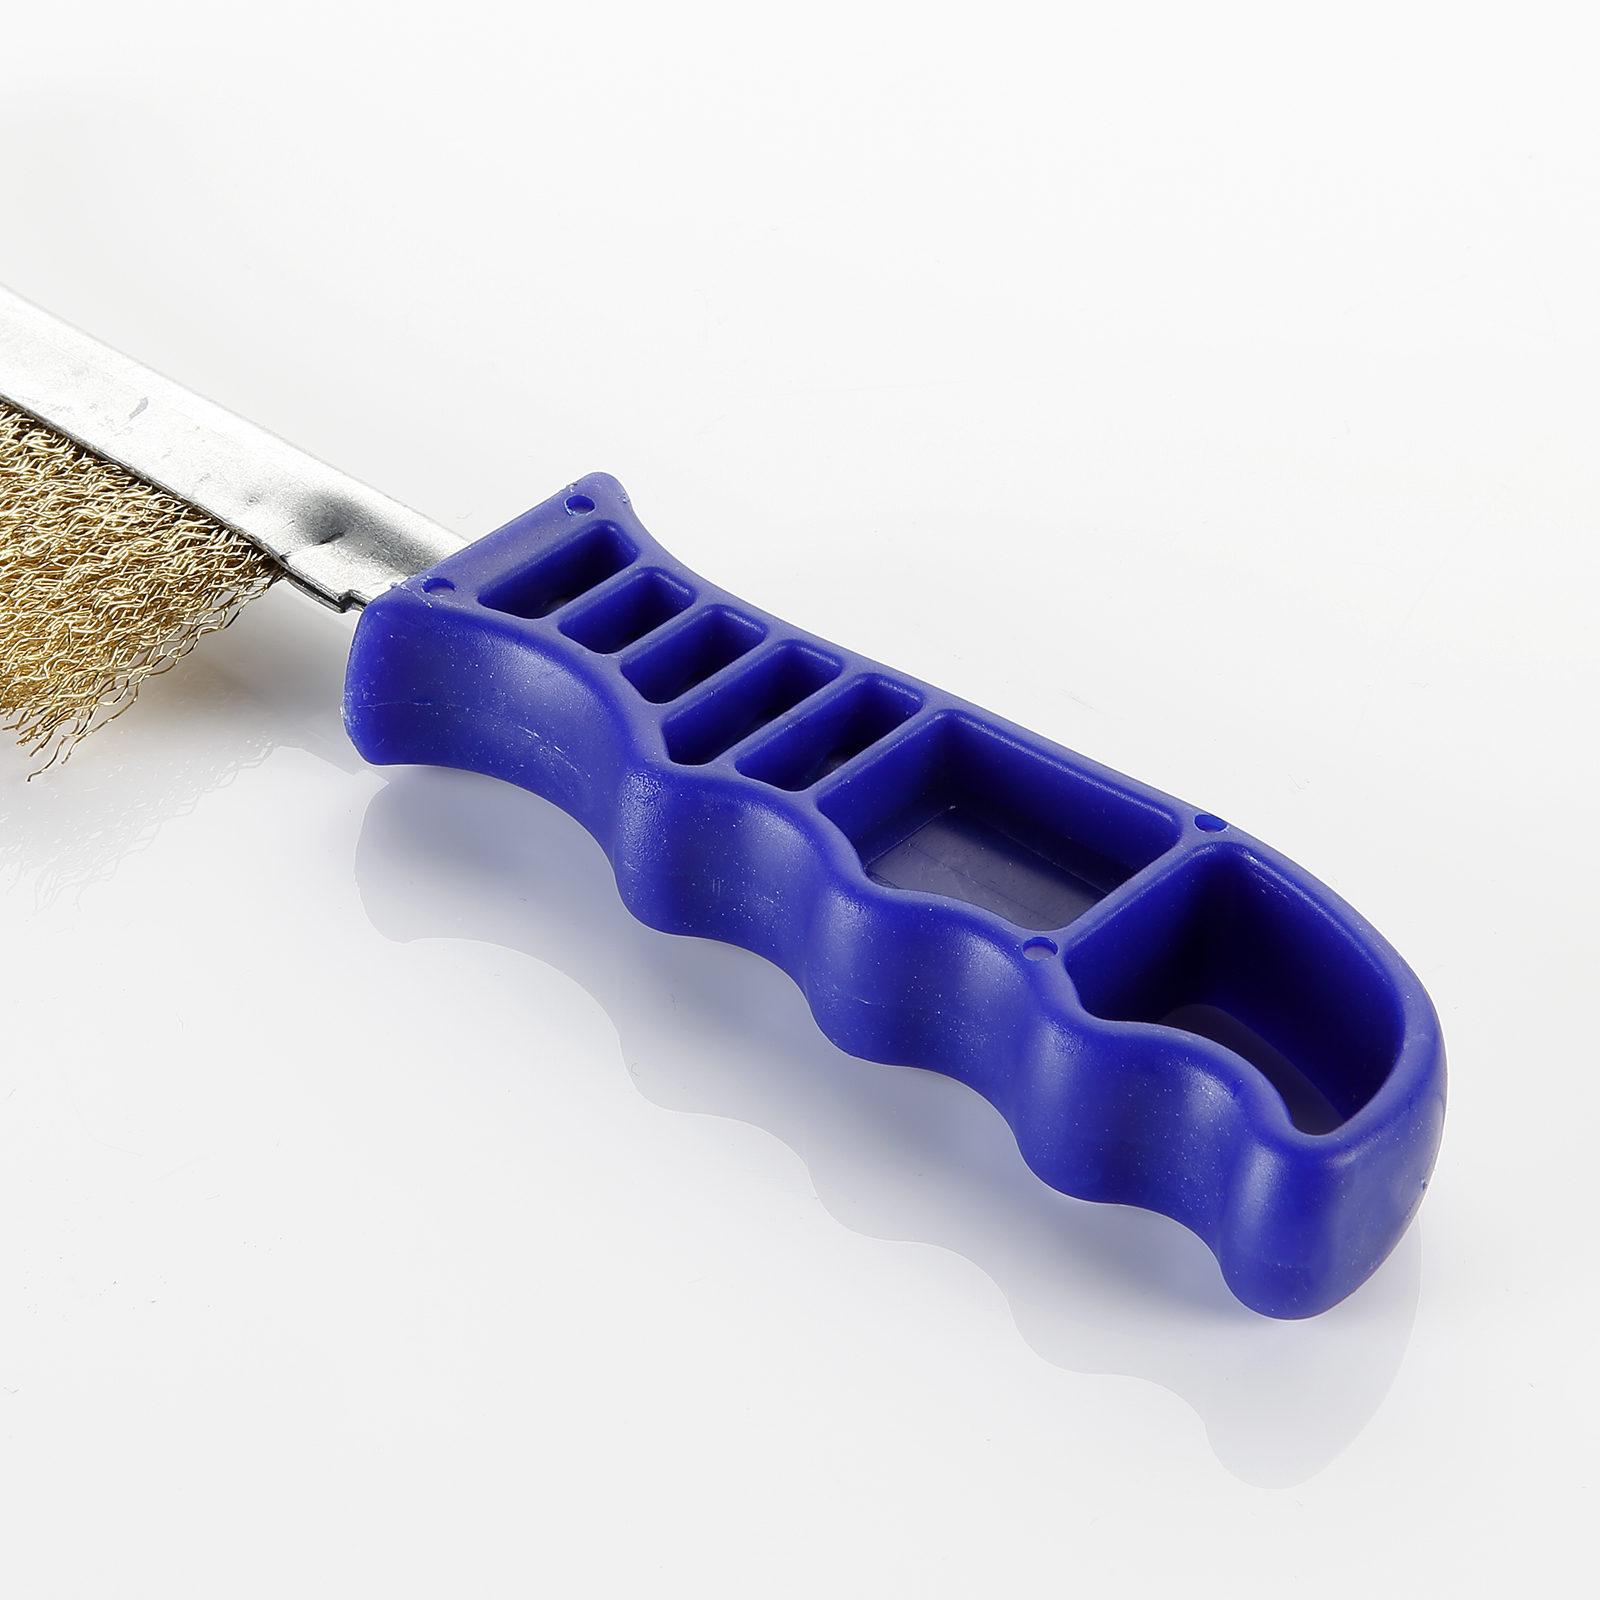 Crimped Brass Plated Wire Brush With Plastic Handle ALYCO, Products